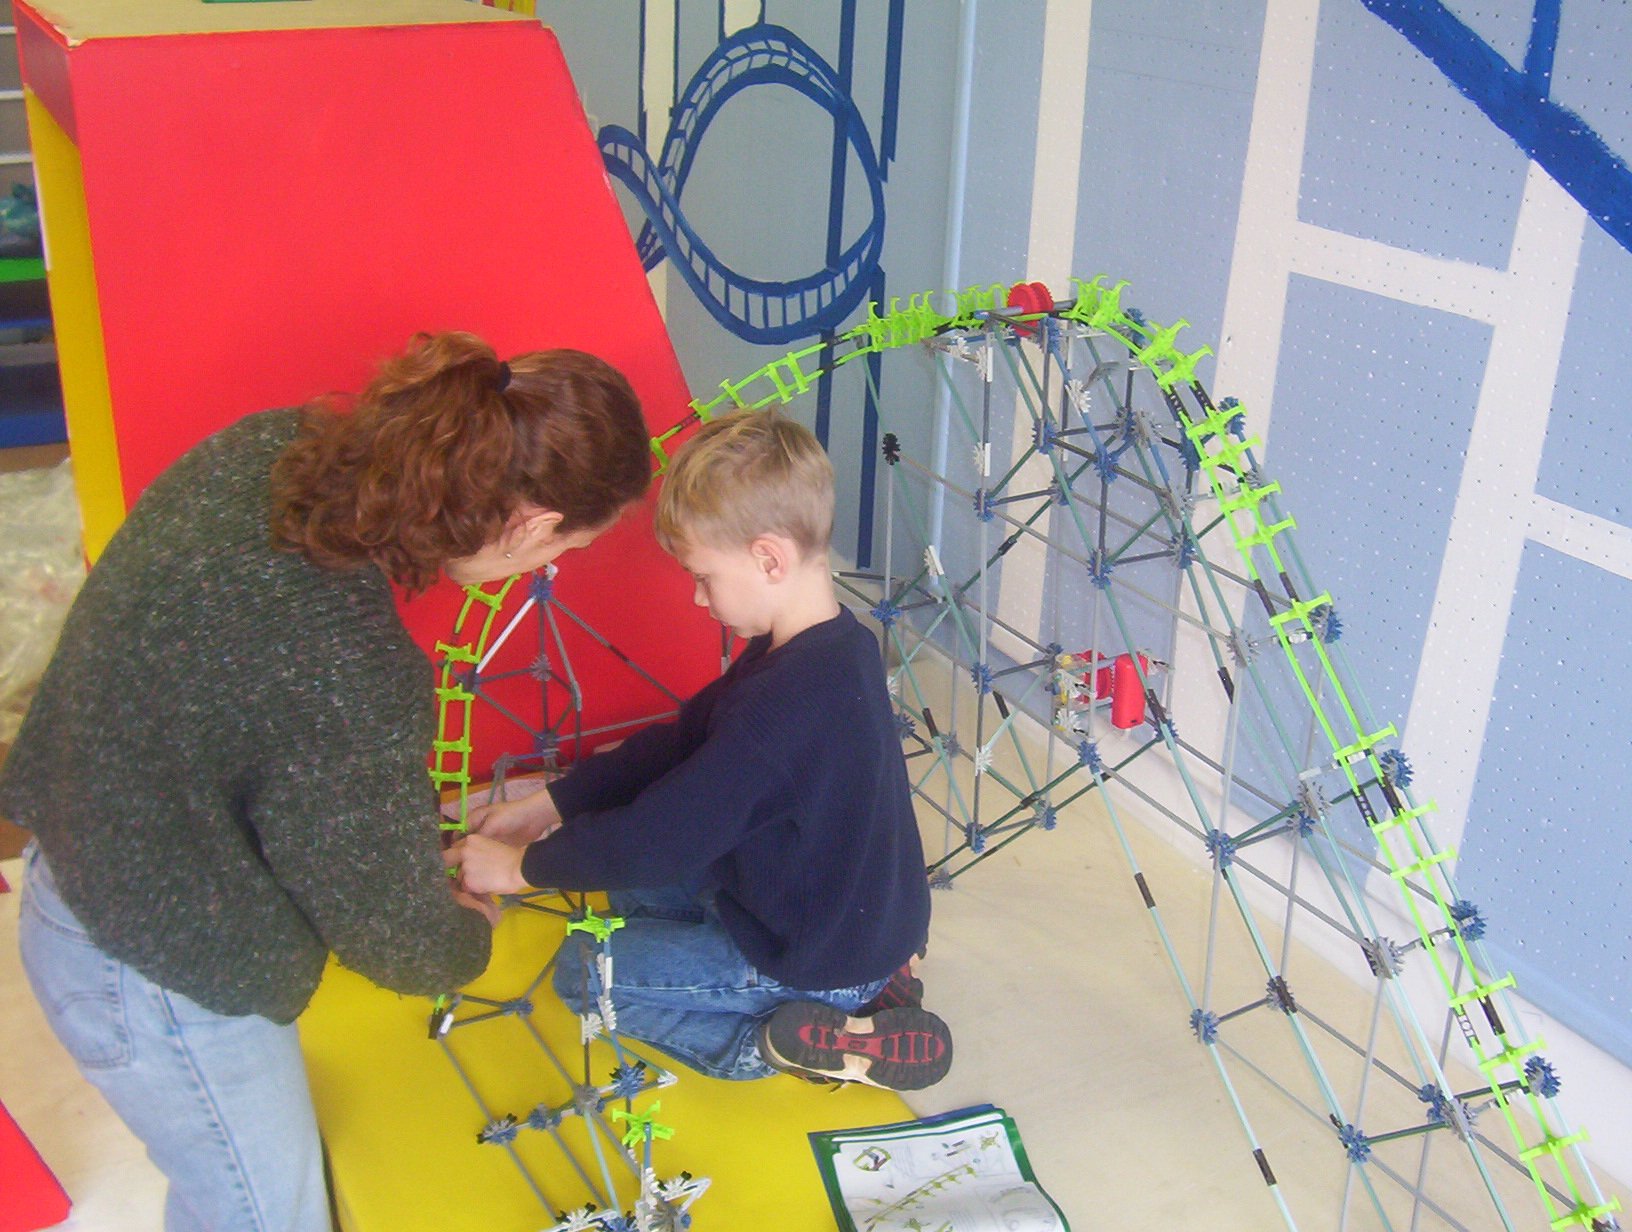  The science exhibit at 30 N. Main was created by volunteers and rotated several times each year.  